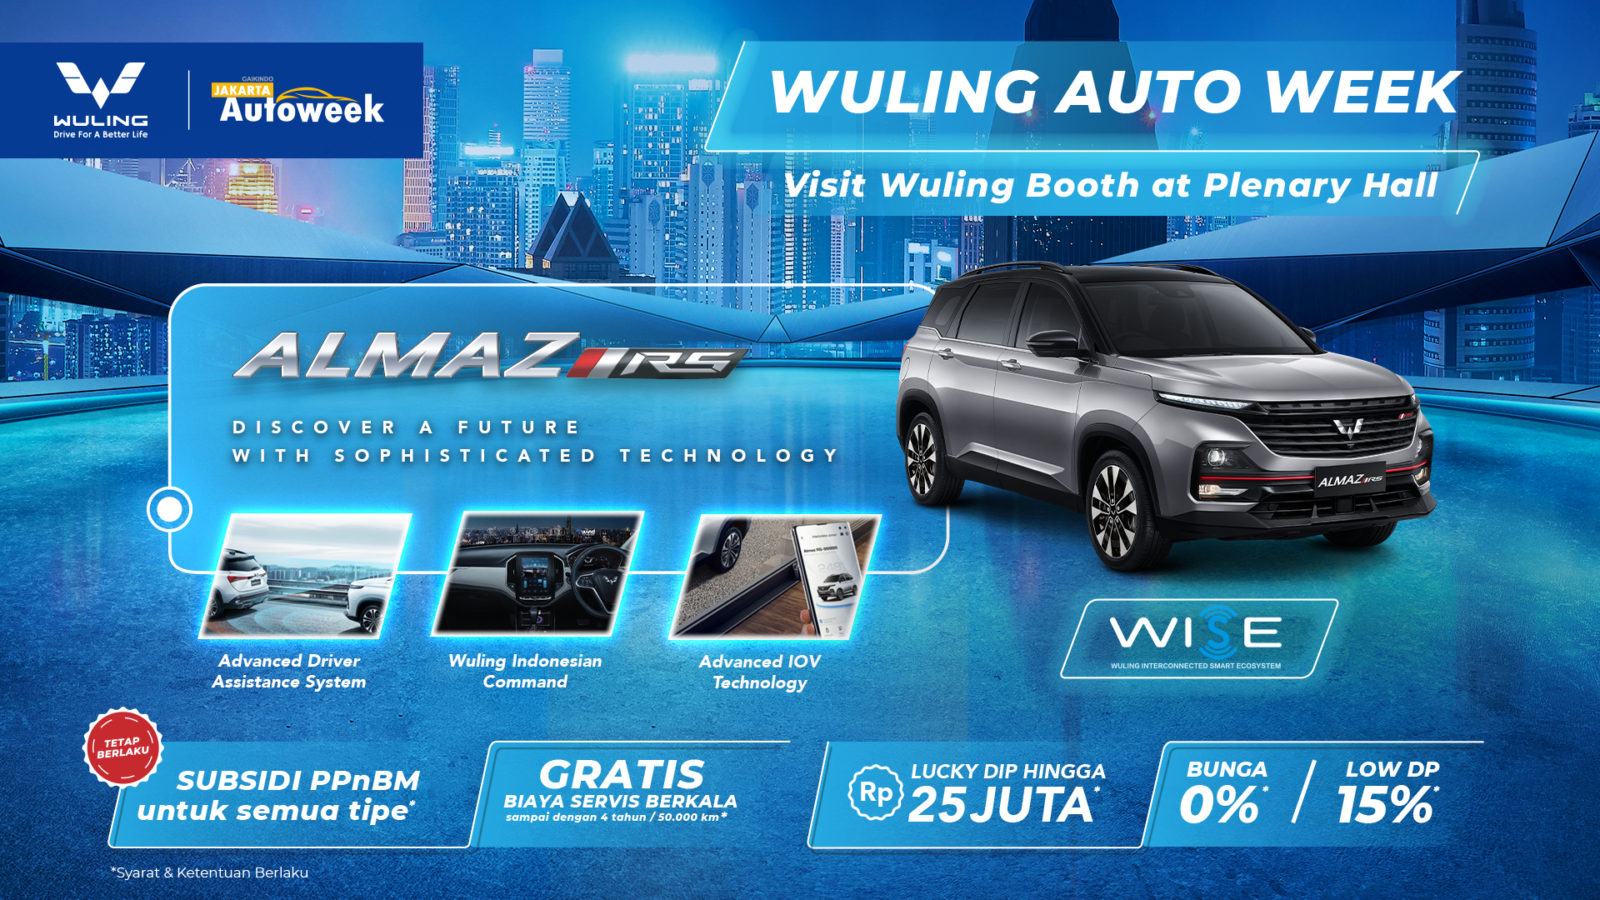 Image Wuling Participates in Jakarta Auto Week